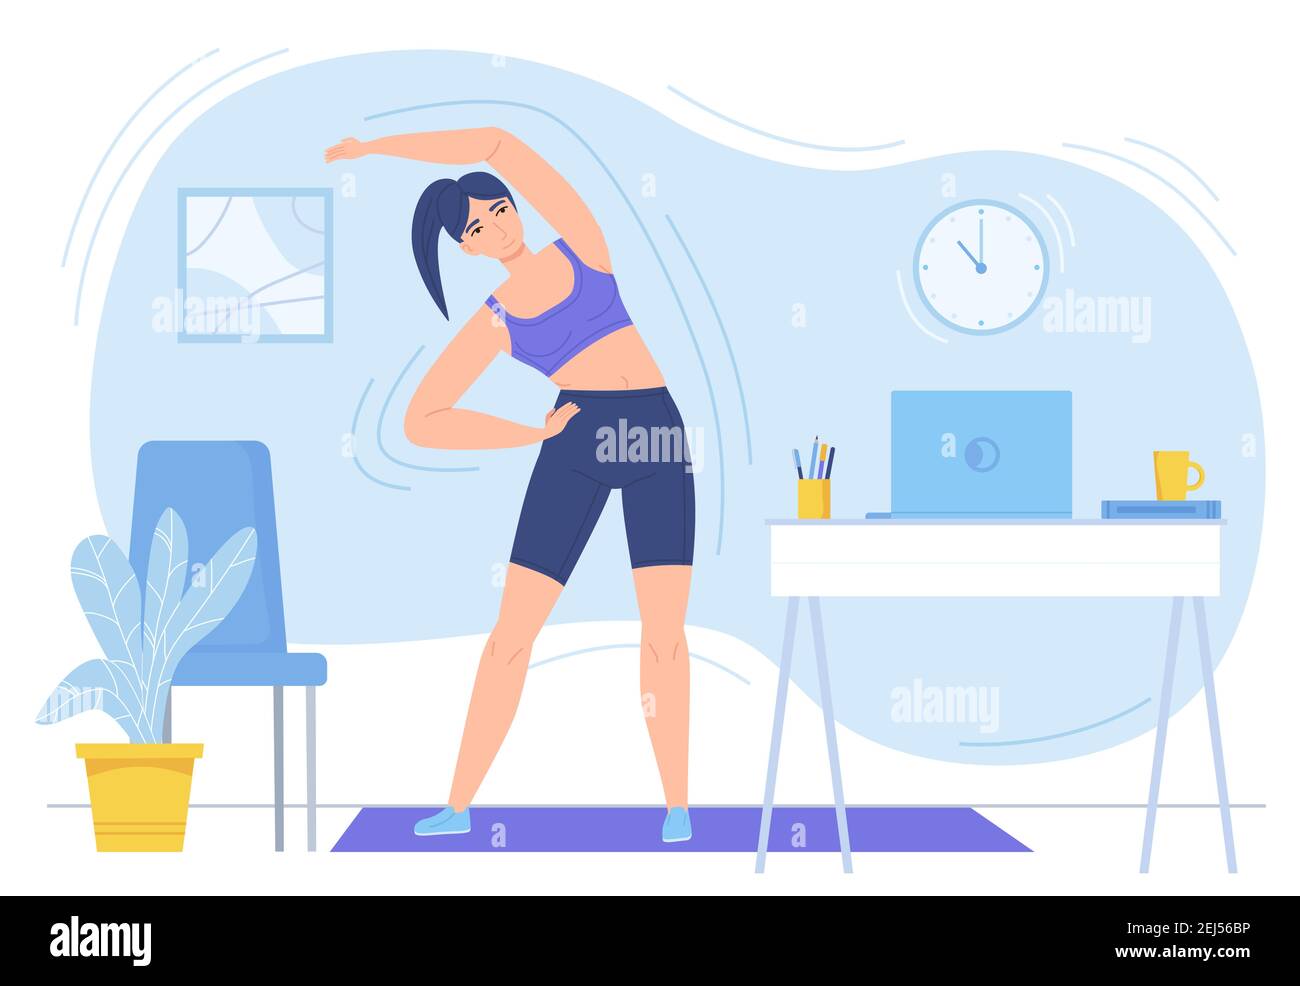 Girl practicing fitness on mat at home. Online sport, healthy lifestyle, remote work break concept. Stock vector illustration isolated on white Stock Vector